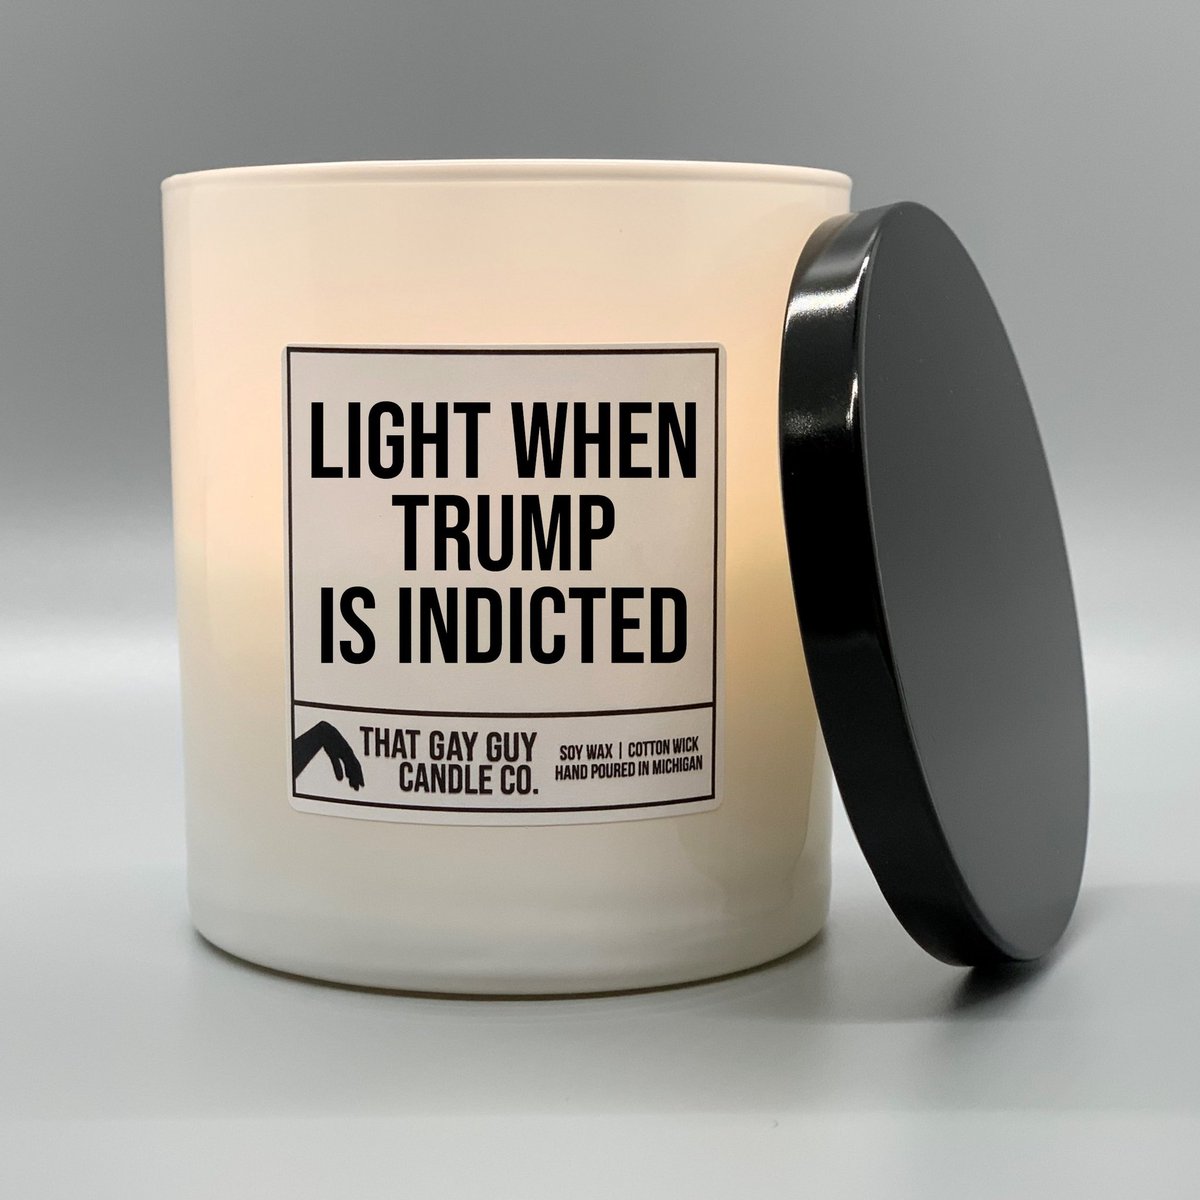 RT if you’re ready to celebrate Trump’s indictment! 🔥 Shop Now ➝ thatgayguycandlecompany.com